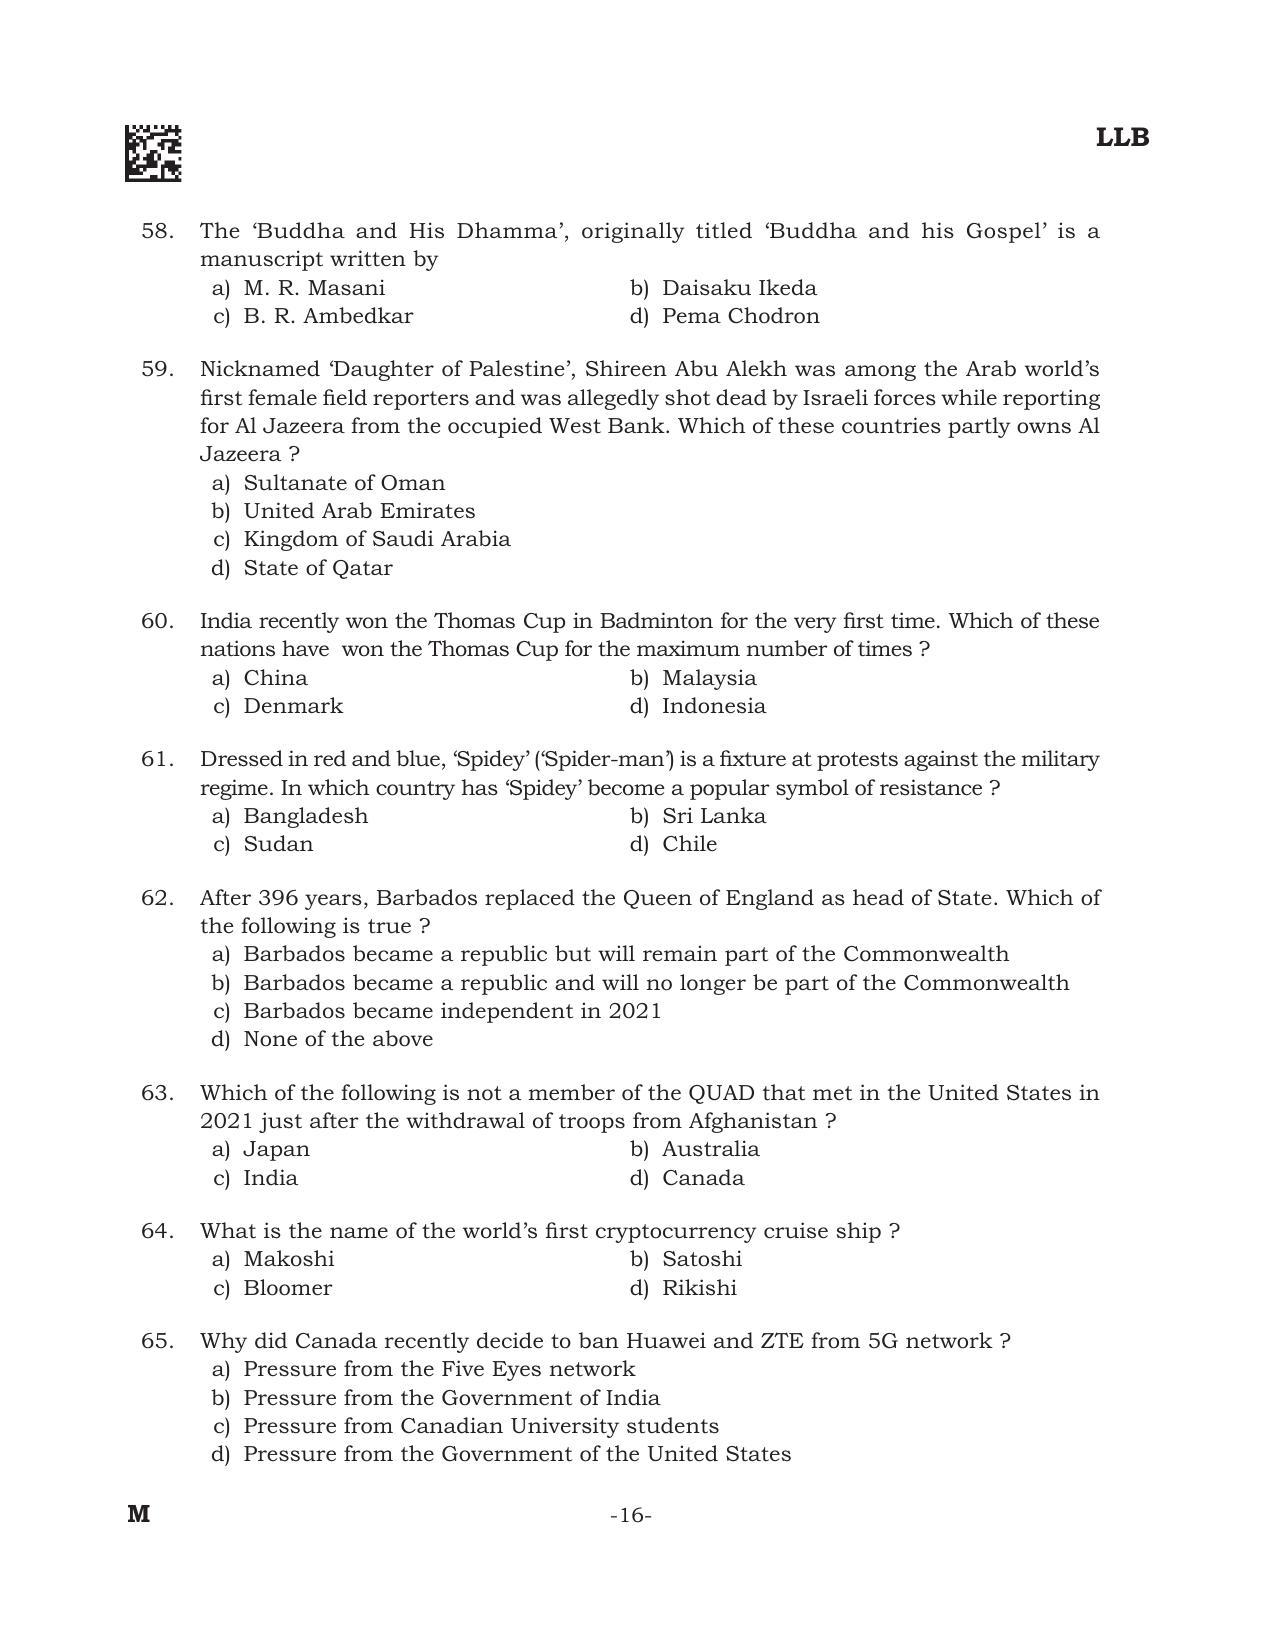 AILET 2022 Question Paper for BA LLB - Page 16